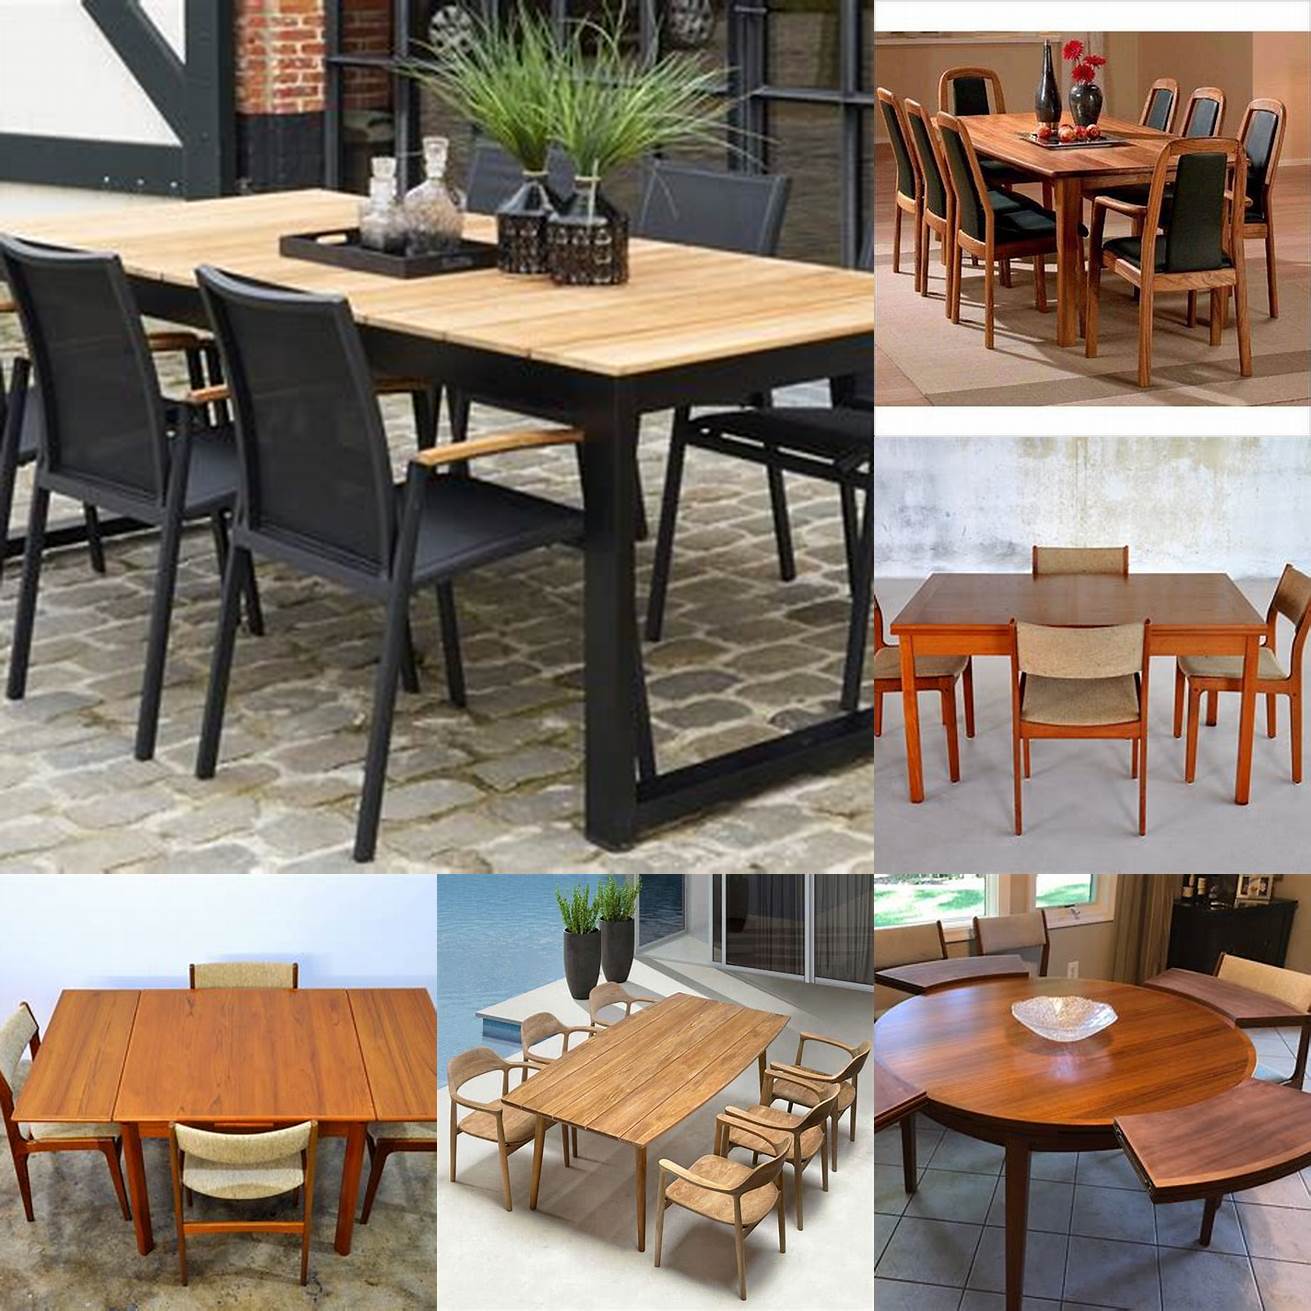 A contemporary teak dining table